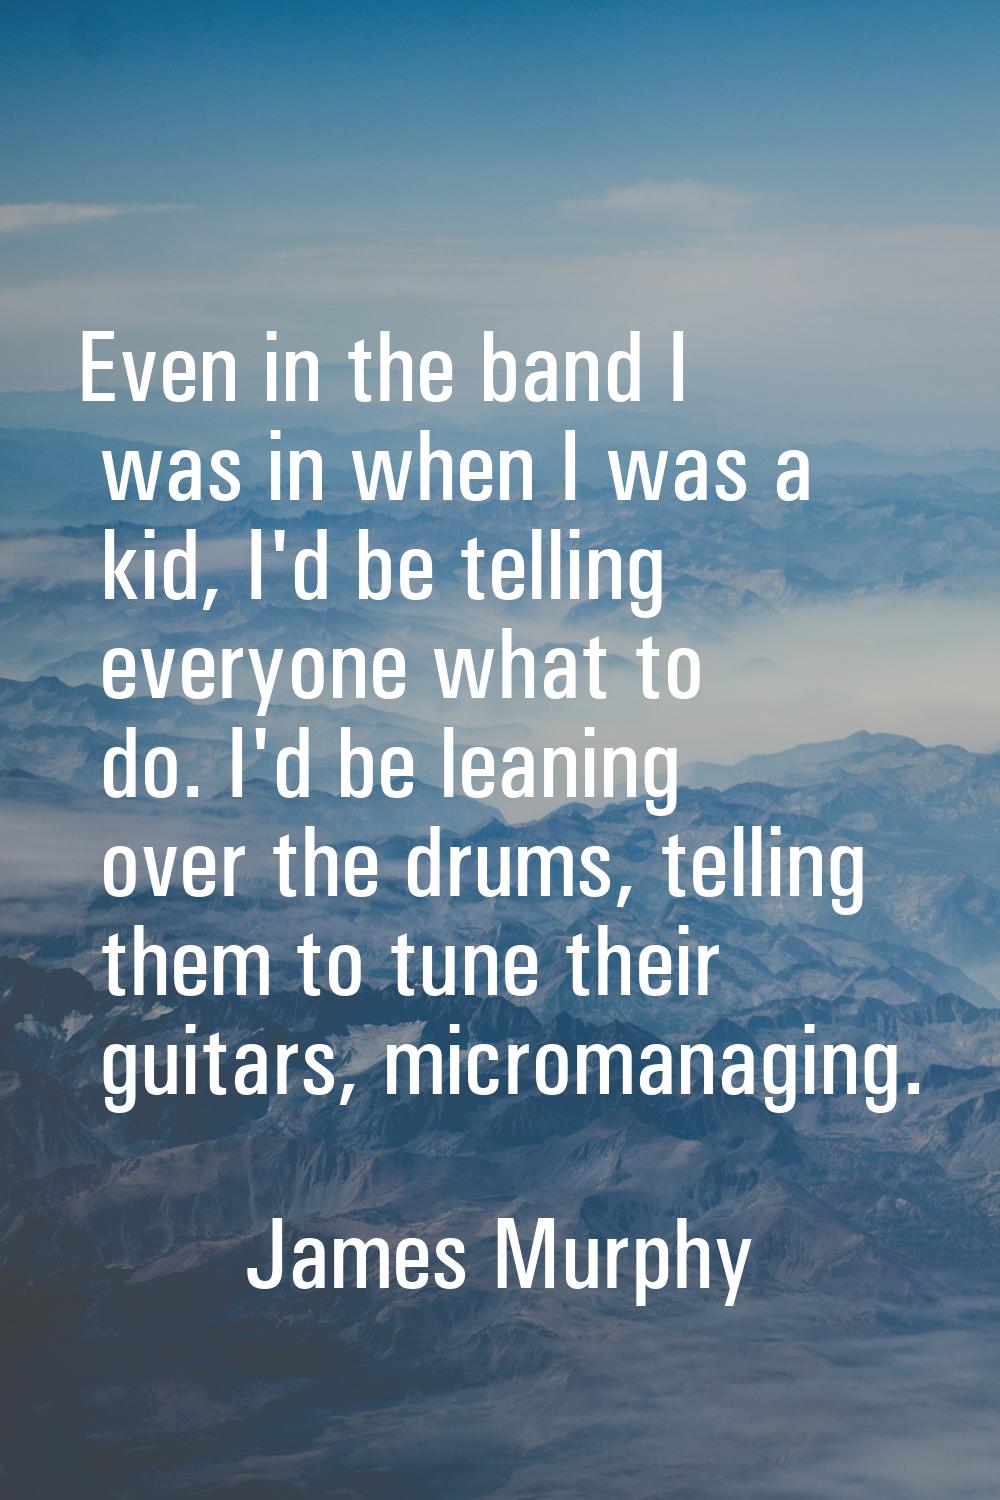 Even in the band I was in when I was a kid, I'd be telling everyone what to do. I'd be leaning over